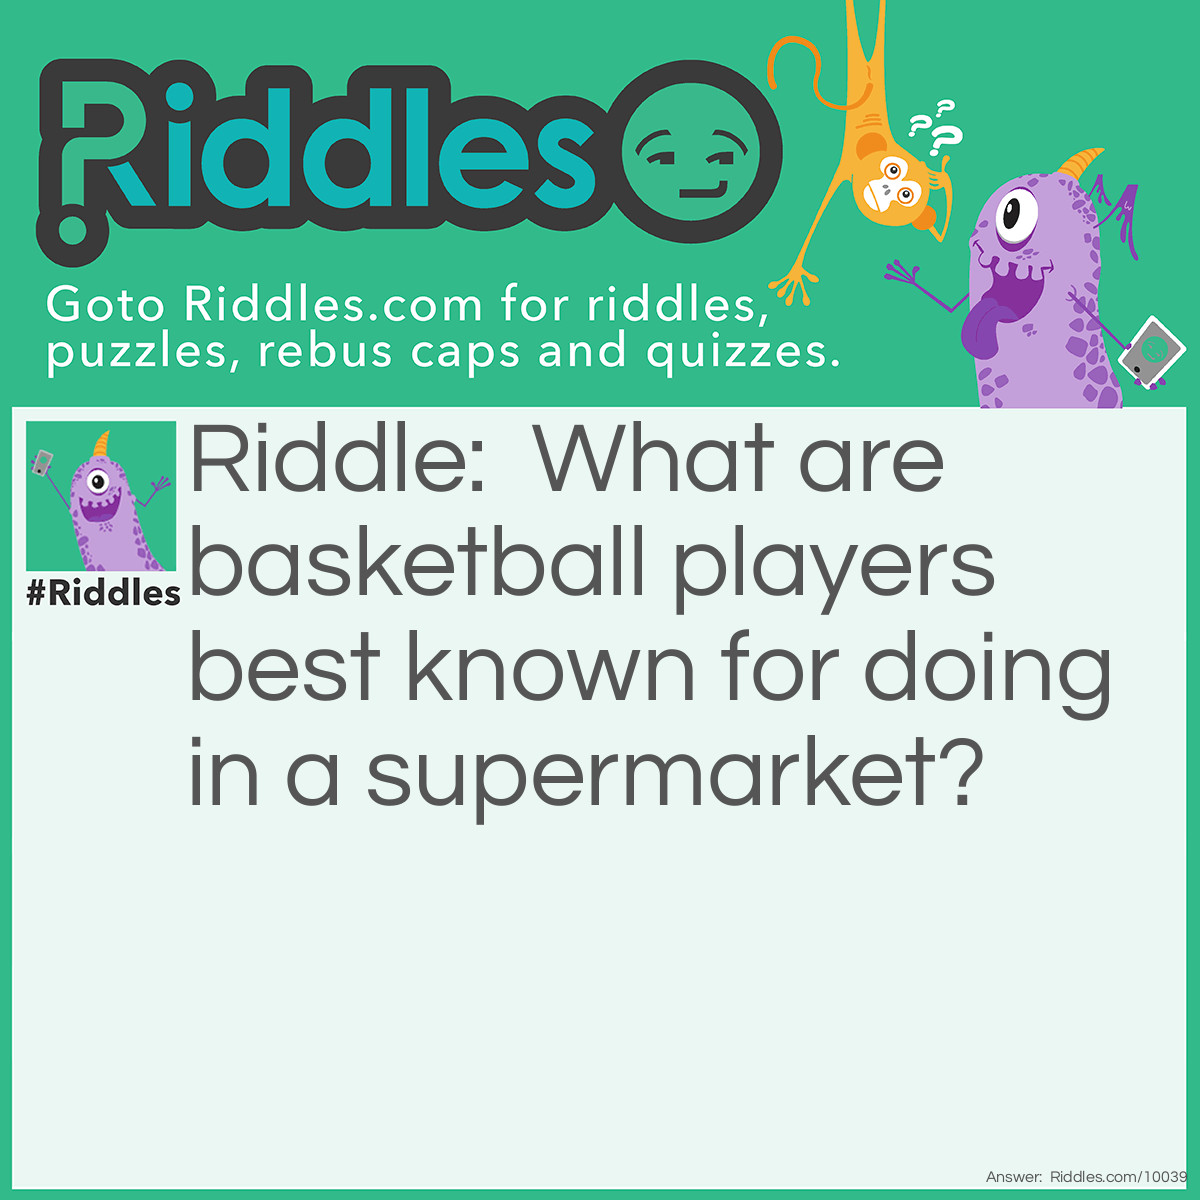 Riddle: What are basketball players best known for doing in a supermarket? Answer: They dribble towards the can of spaghetti hoops, before slam-dunking it into the basket!